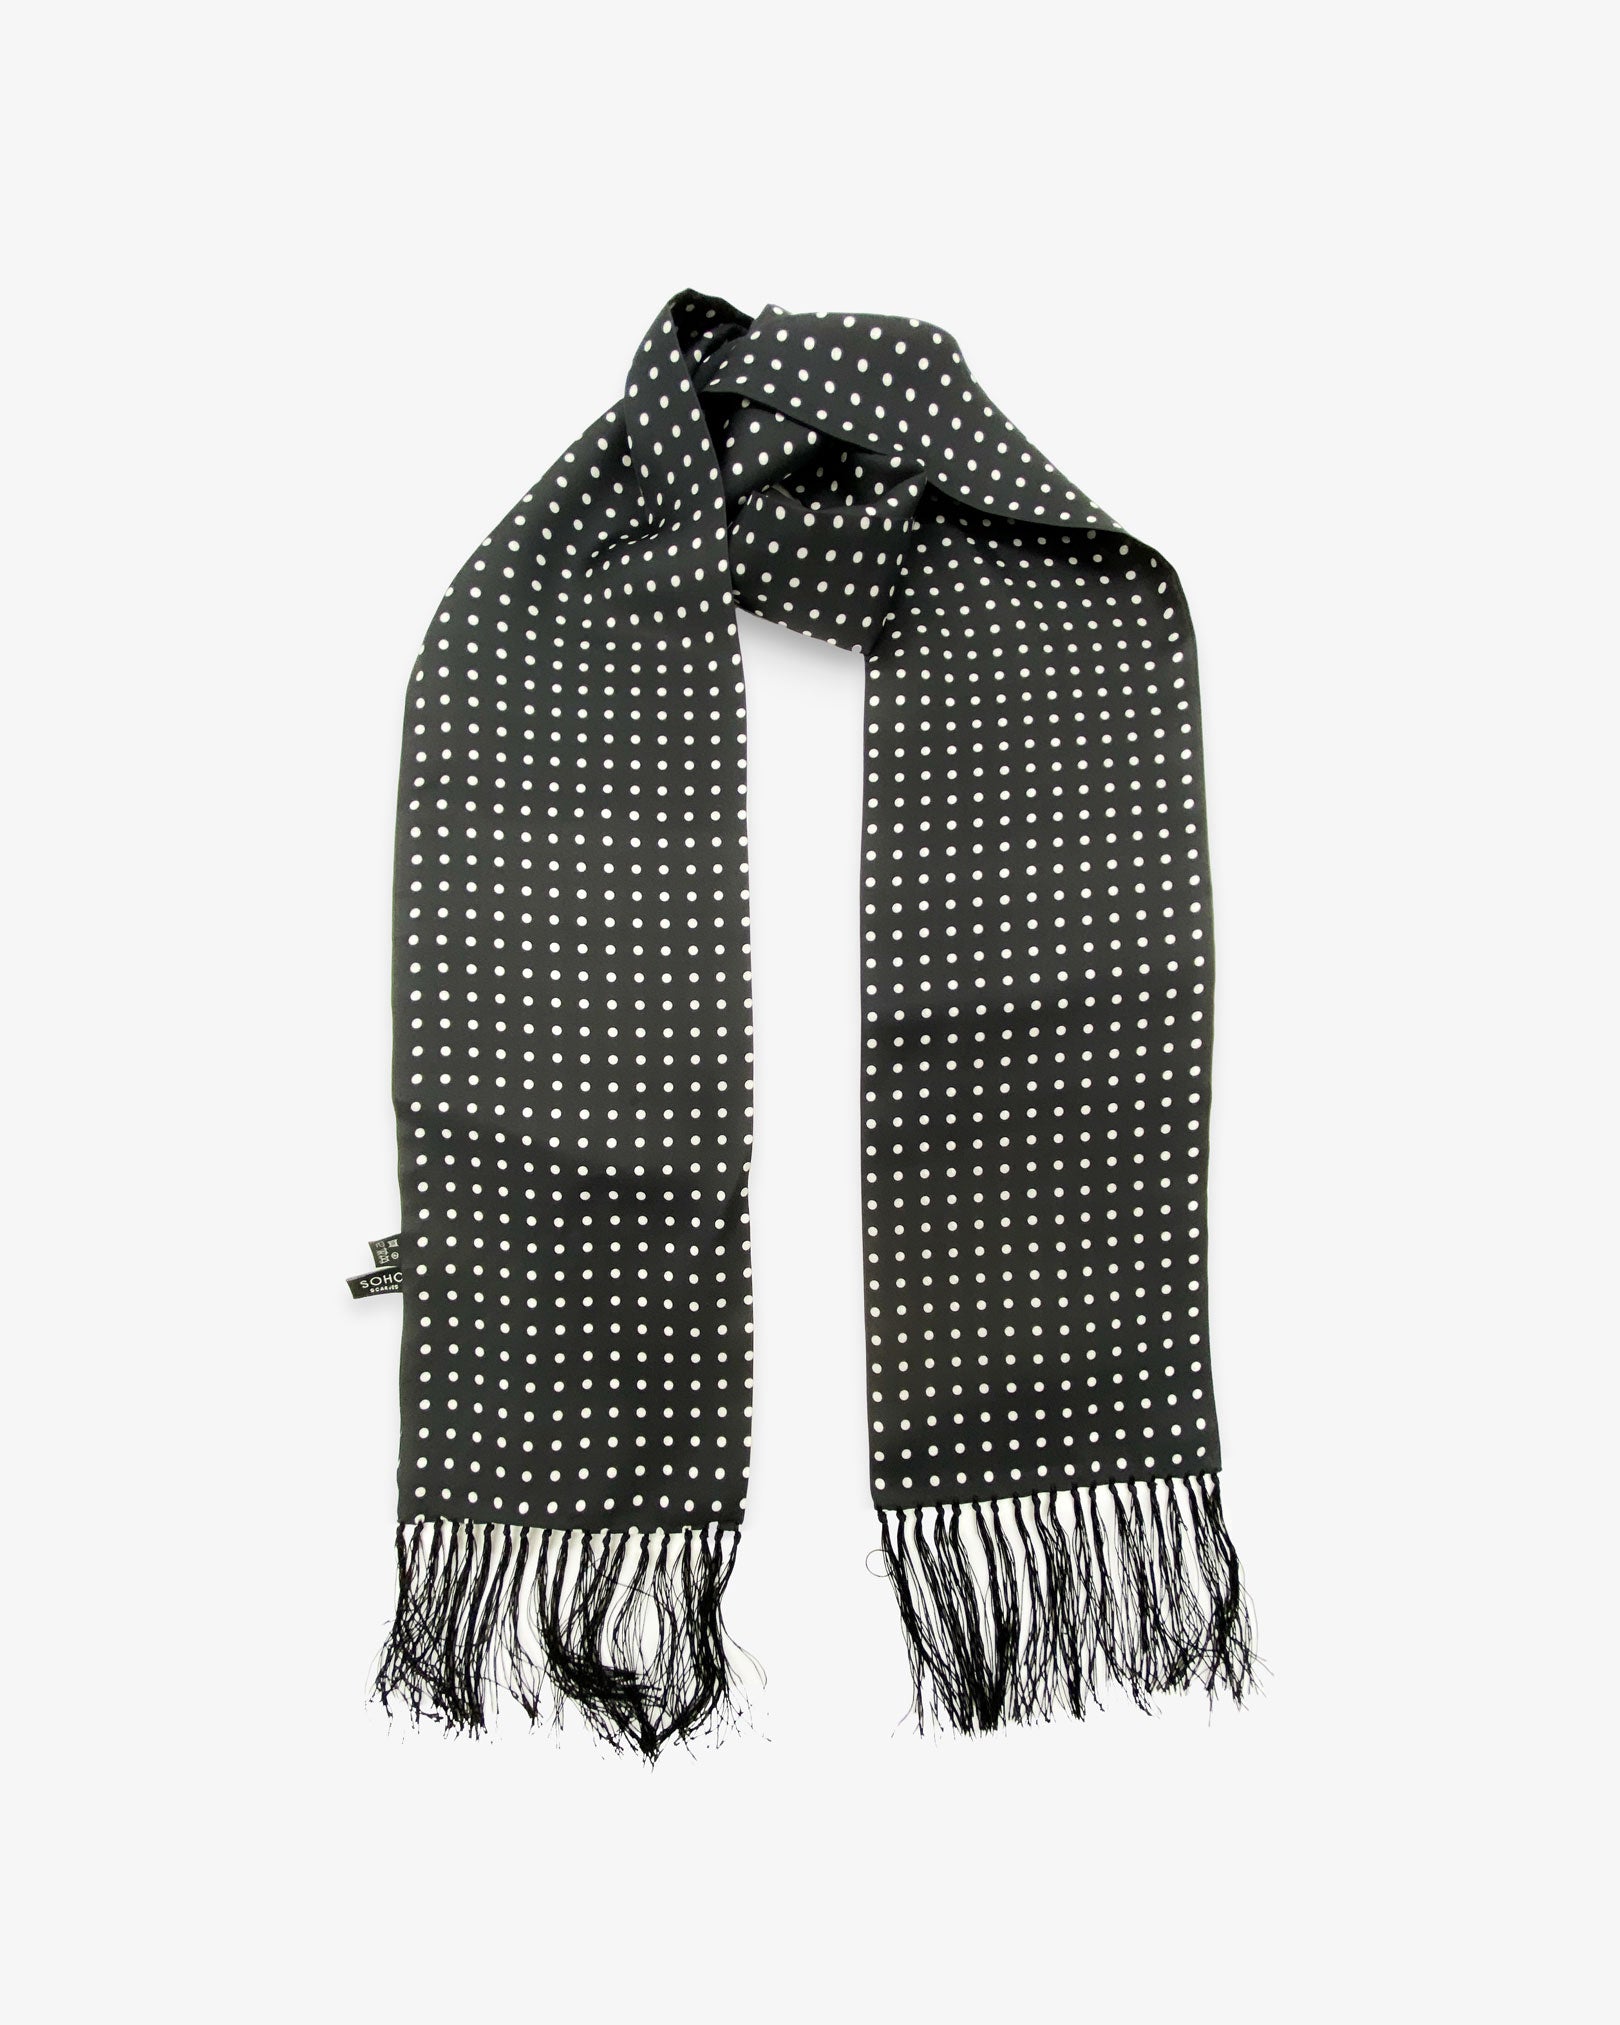 Looped view of the 'Shinagwa' aviator scarf, clearly showing the white polka dot pattern, 'Soho Scarves' branding label on the left and the 3 inch black fringe.